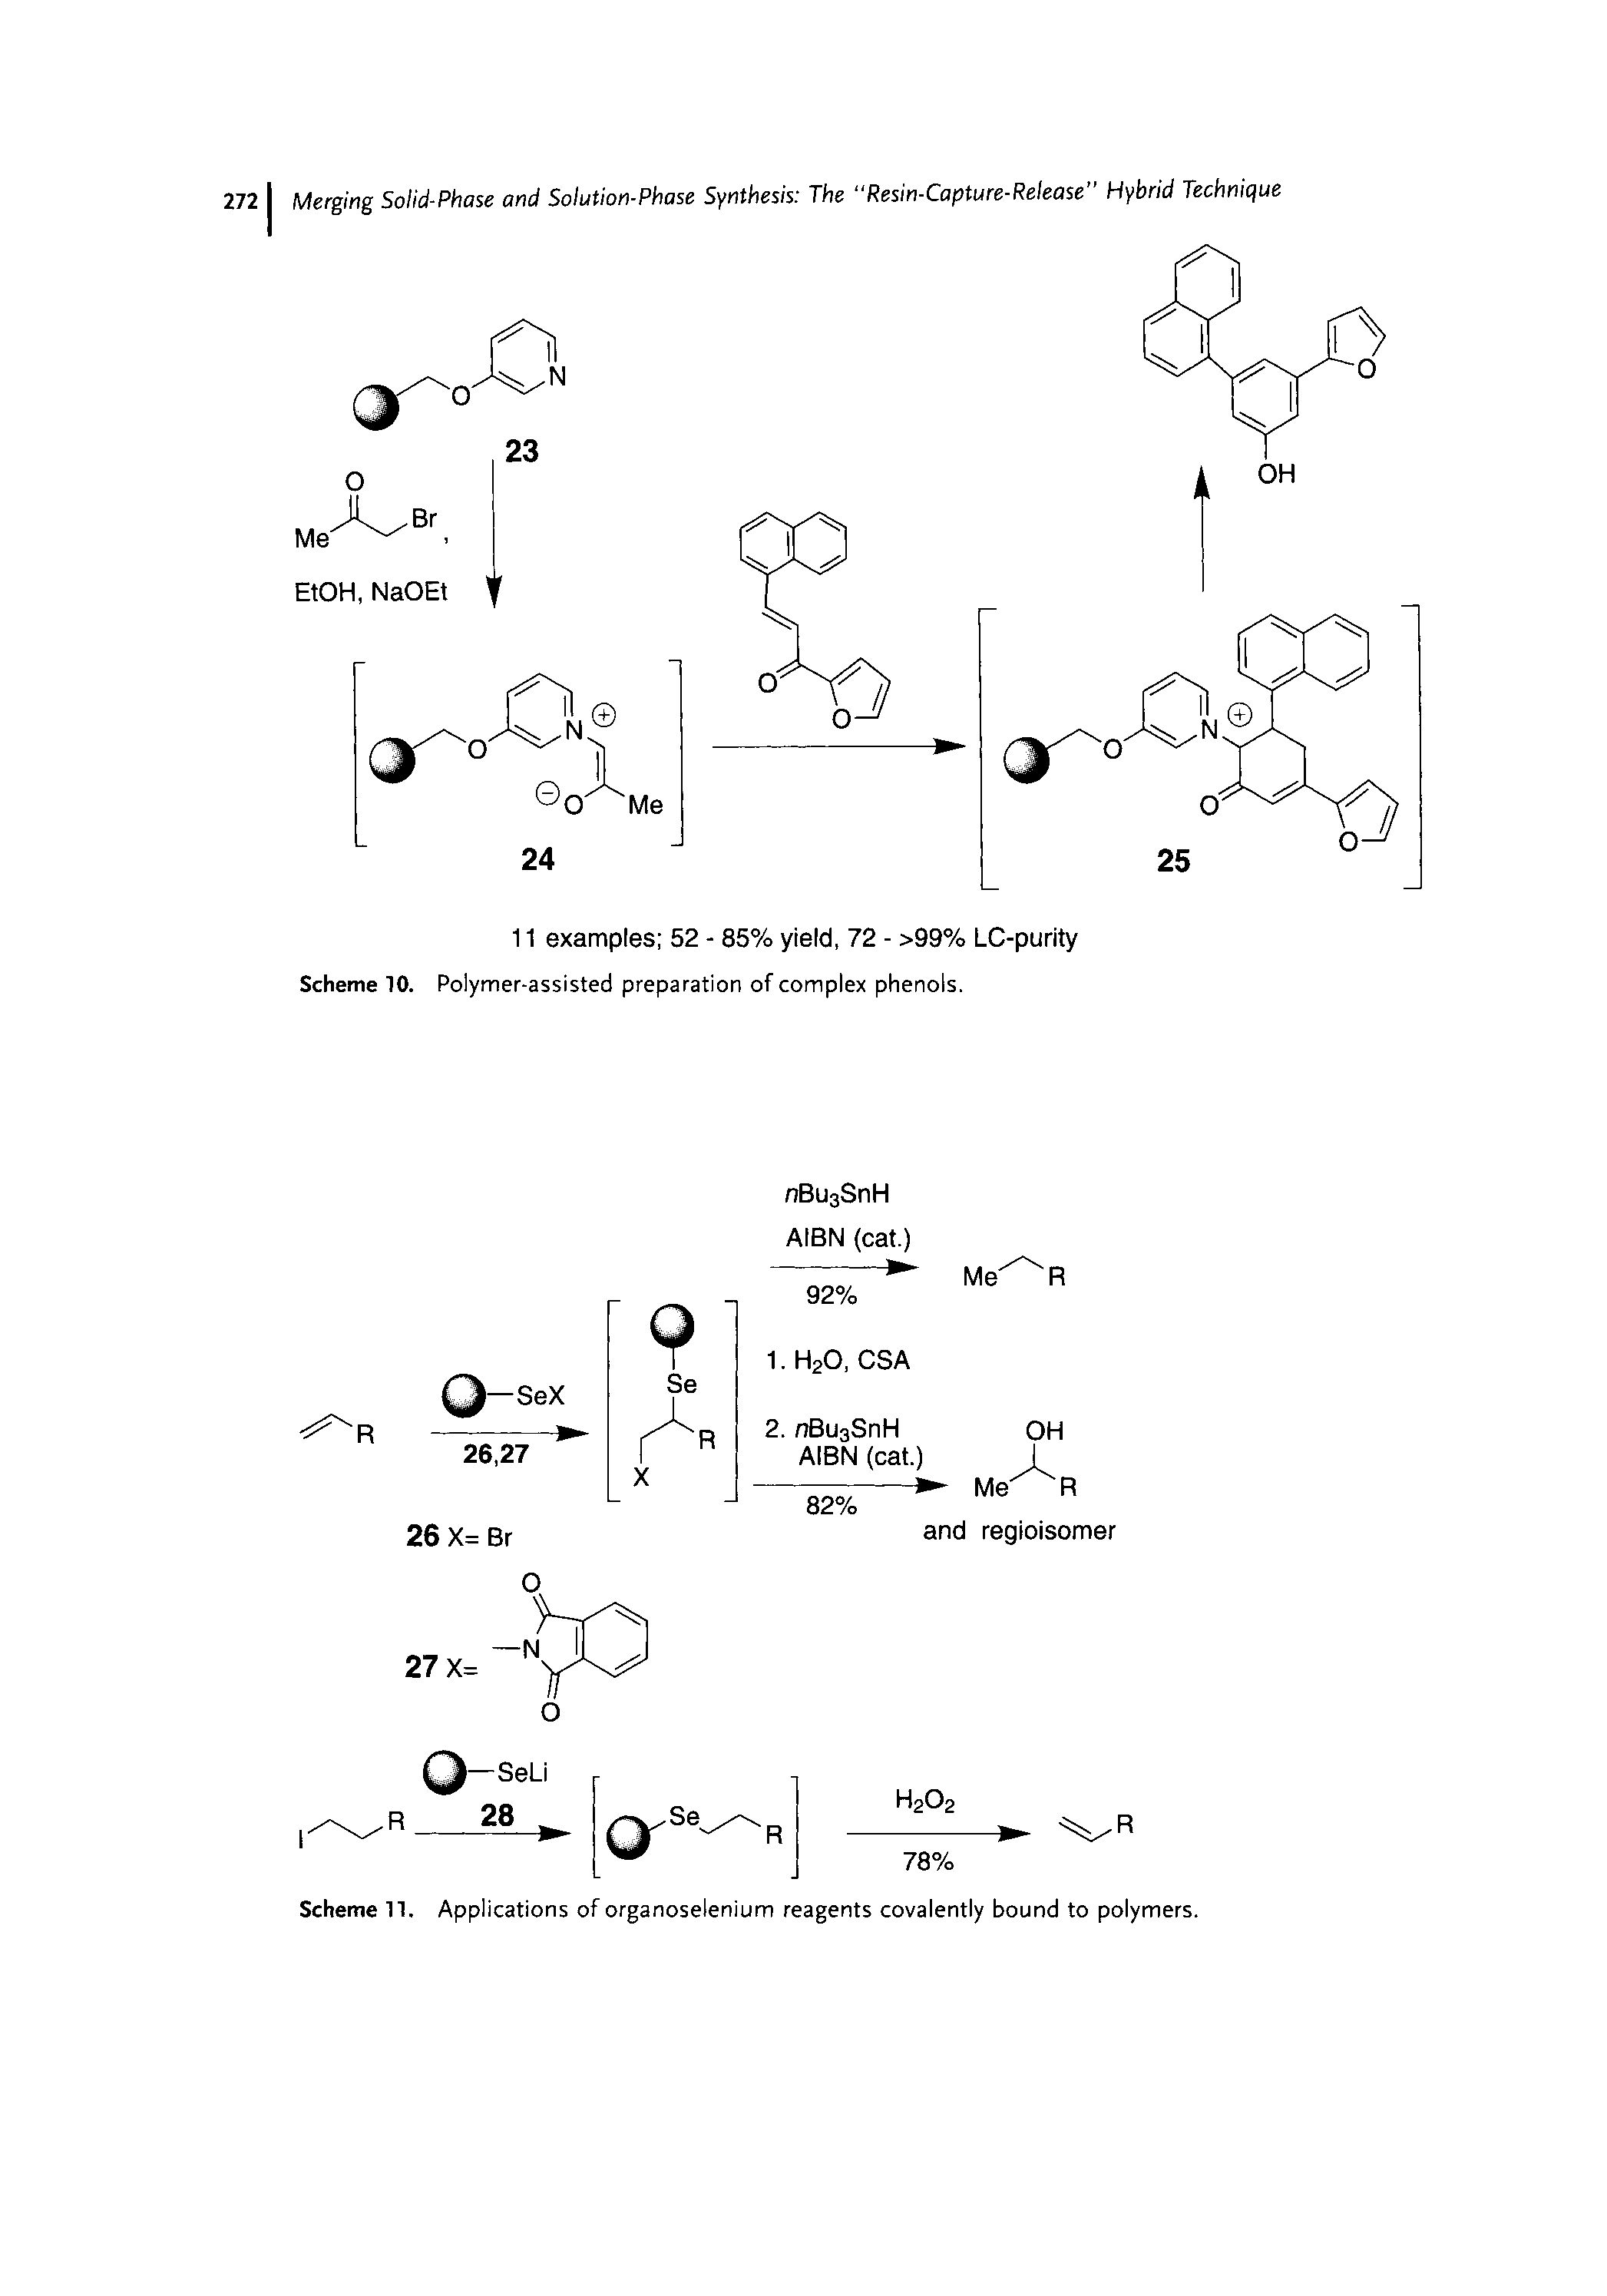 Scheme 11. Applications of organoselenium reagents covalently bound to polymers.